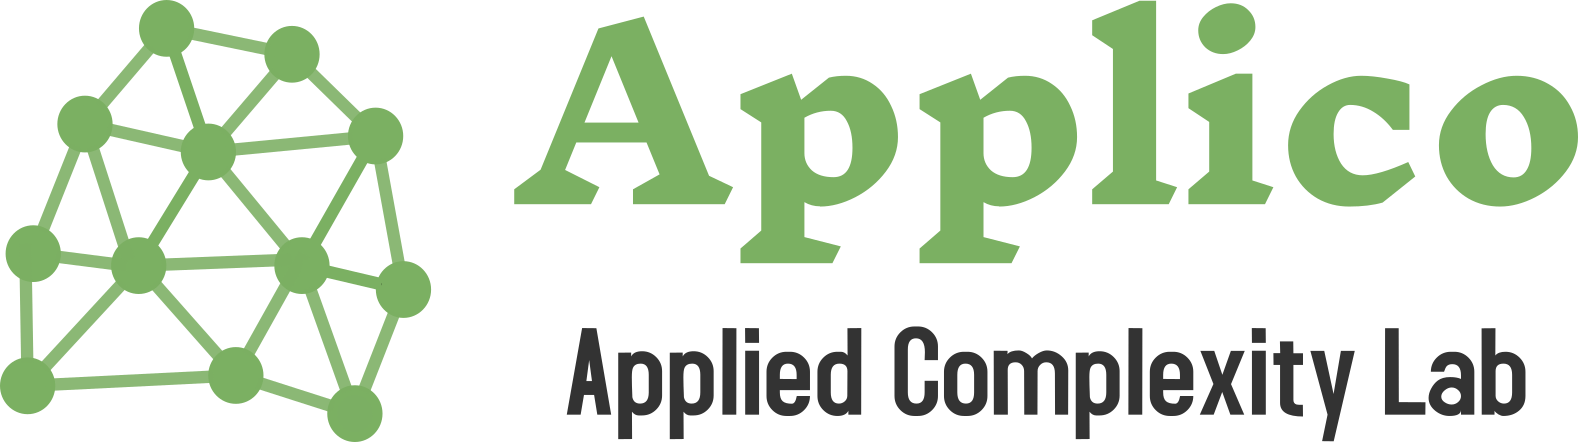 Applied complexity Lab